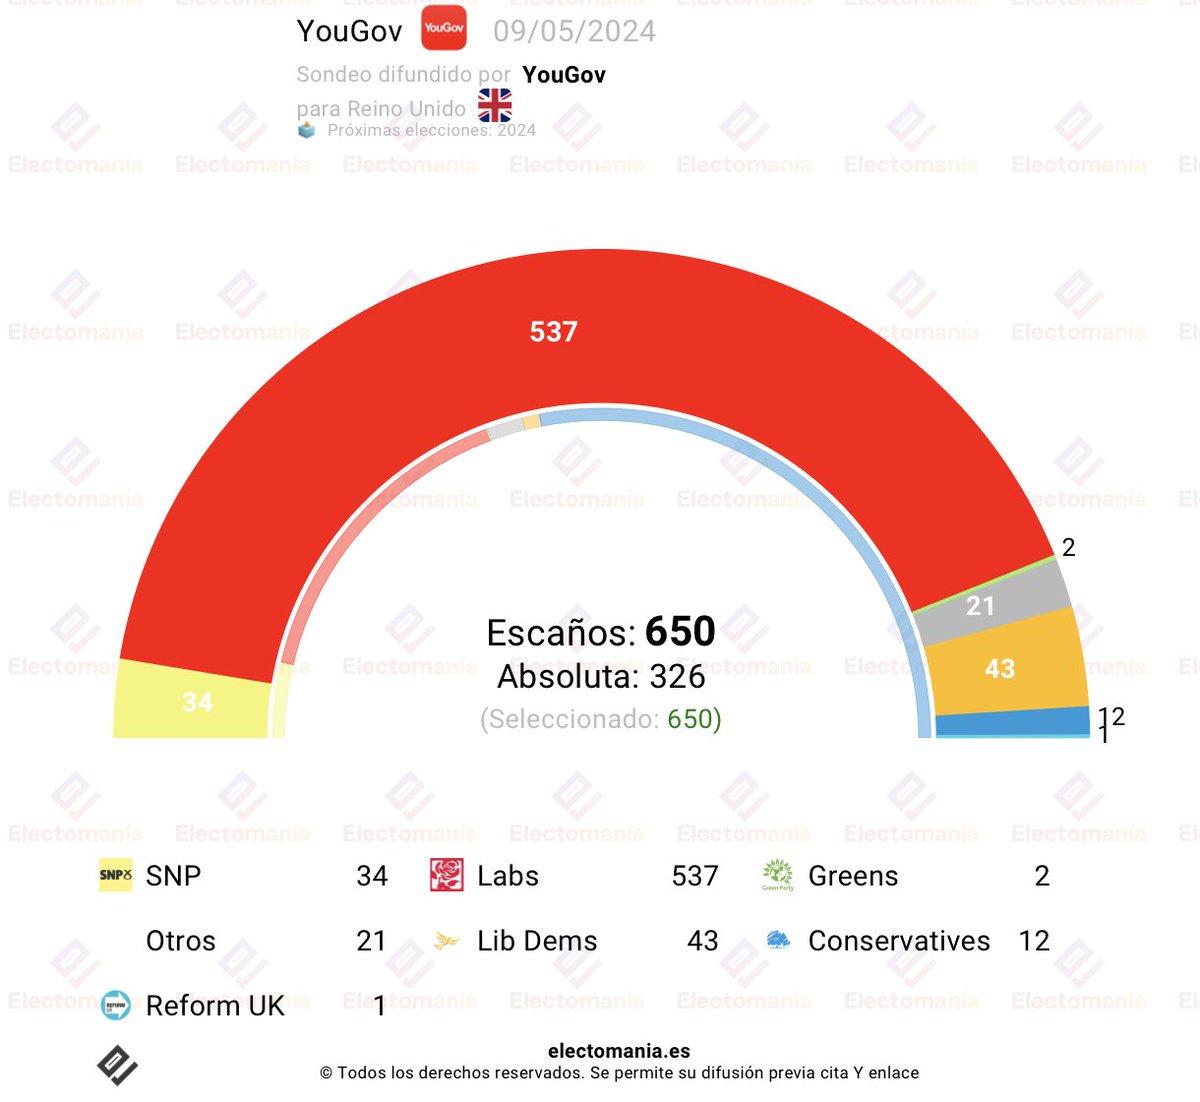 ‼️#UK 🇬🇧 - YouGov poll (May 9): Labour 🔴 leads by 30p, leaving the Tories 🔵 with only 12 seats.

🪑 Seats by EM:

🔴 Lab: 48% (537)
🟠 Lib Dems: 9% (43)
🟡 SNP: 2% (34)
🔵 Cons: 18% (12)
🌻 Greens: 7% (2)
👷 Reform: 13% (1)

Others: 21

↘️
electomania.es/en/encuesta-uk… #CRYMUN